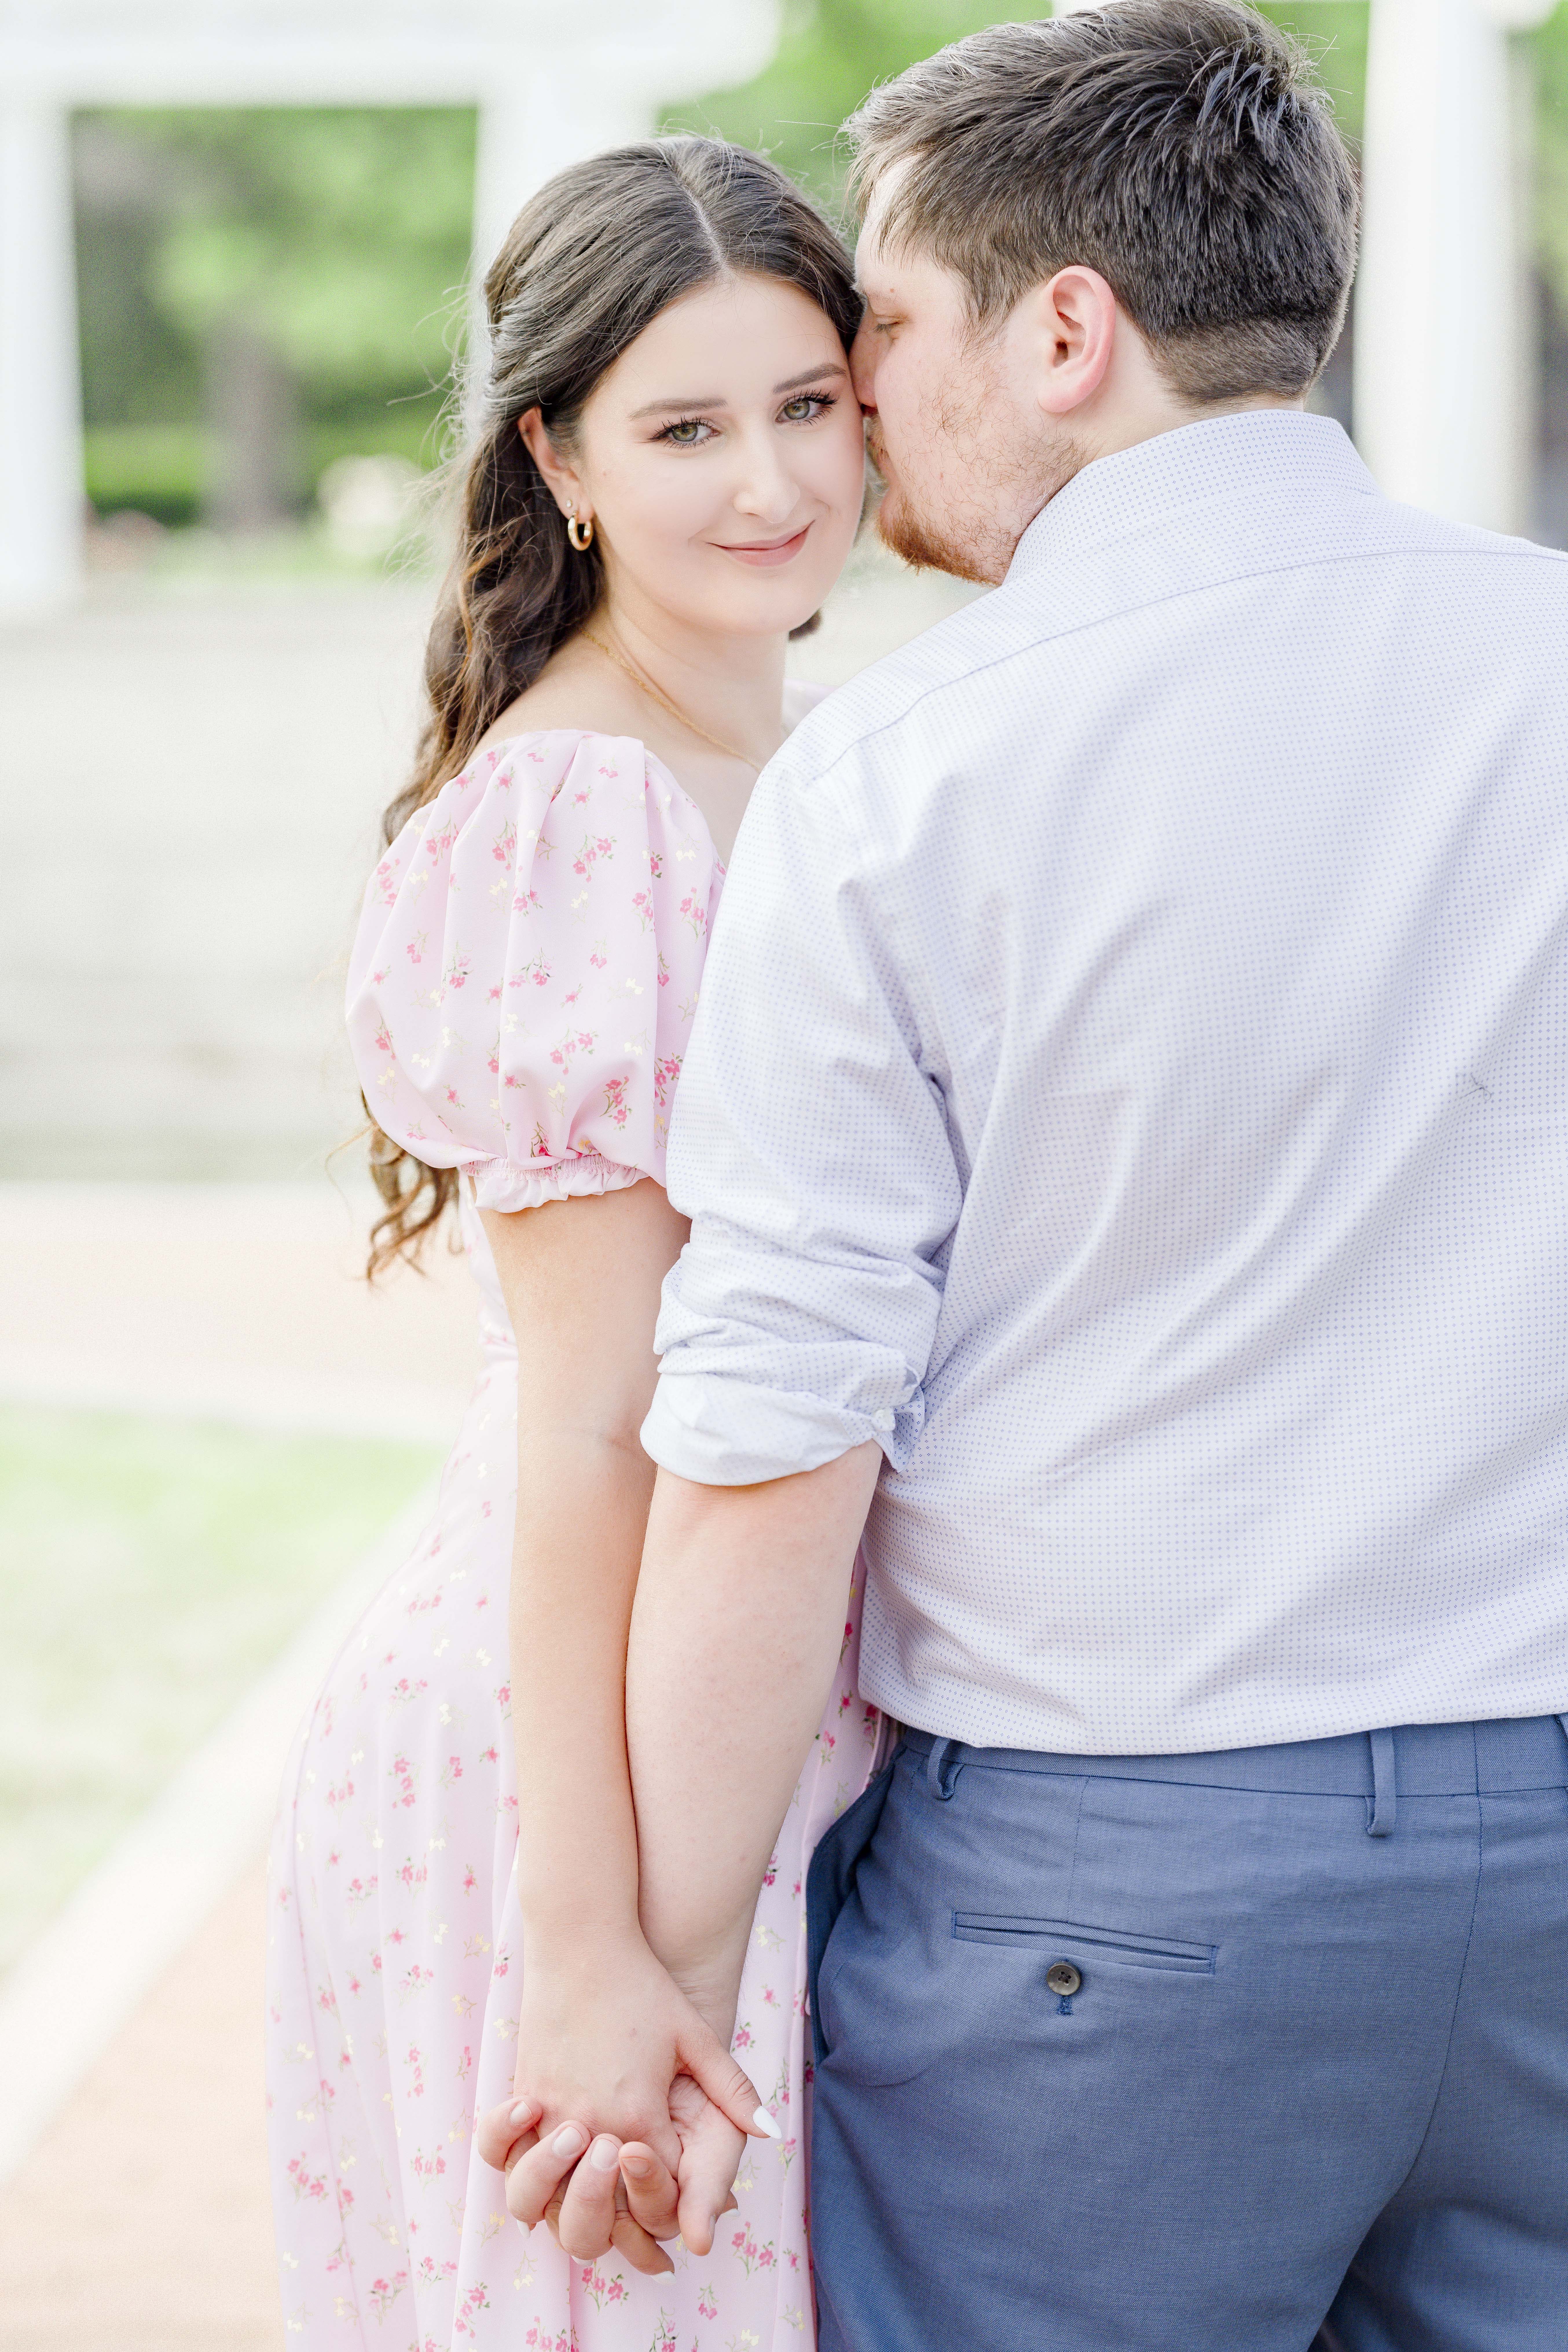 A Romantic Engagement Session in Fort Wayne, Indiana